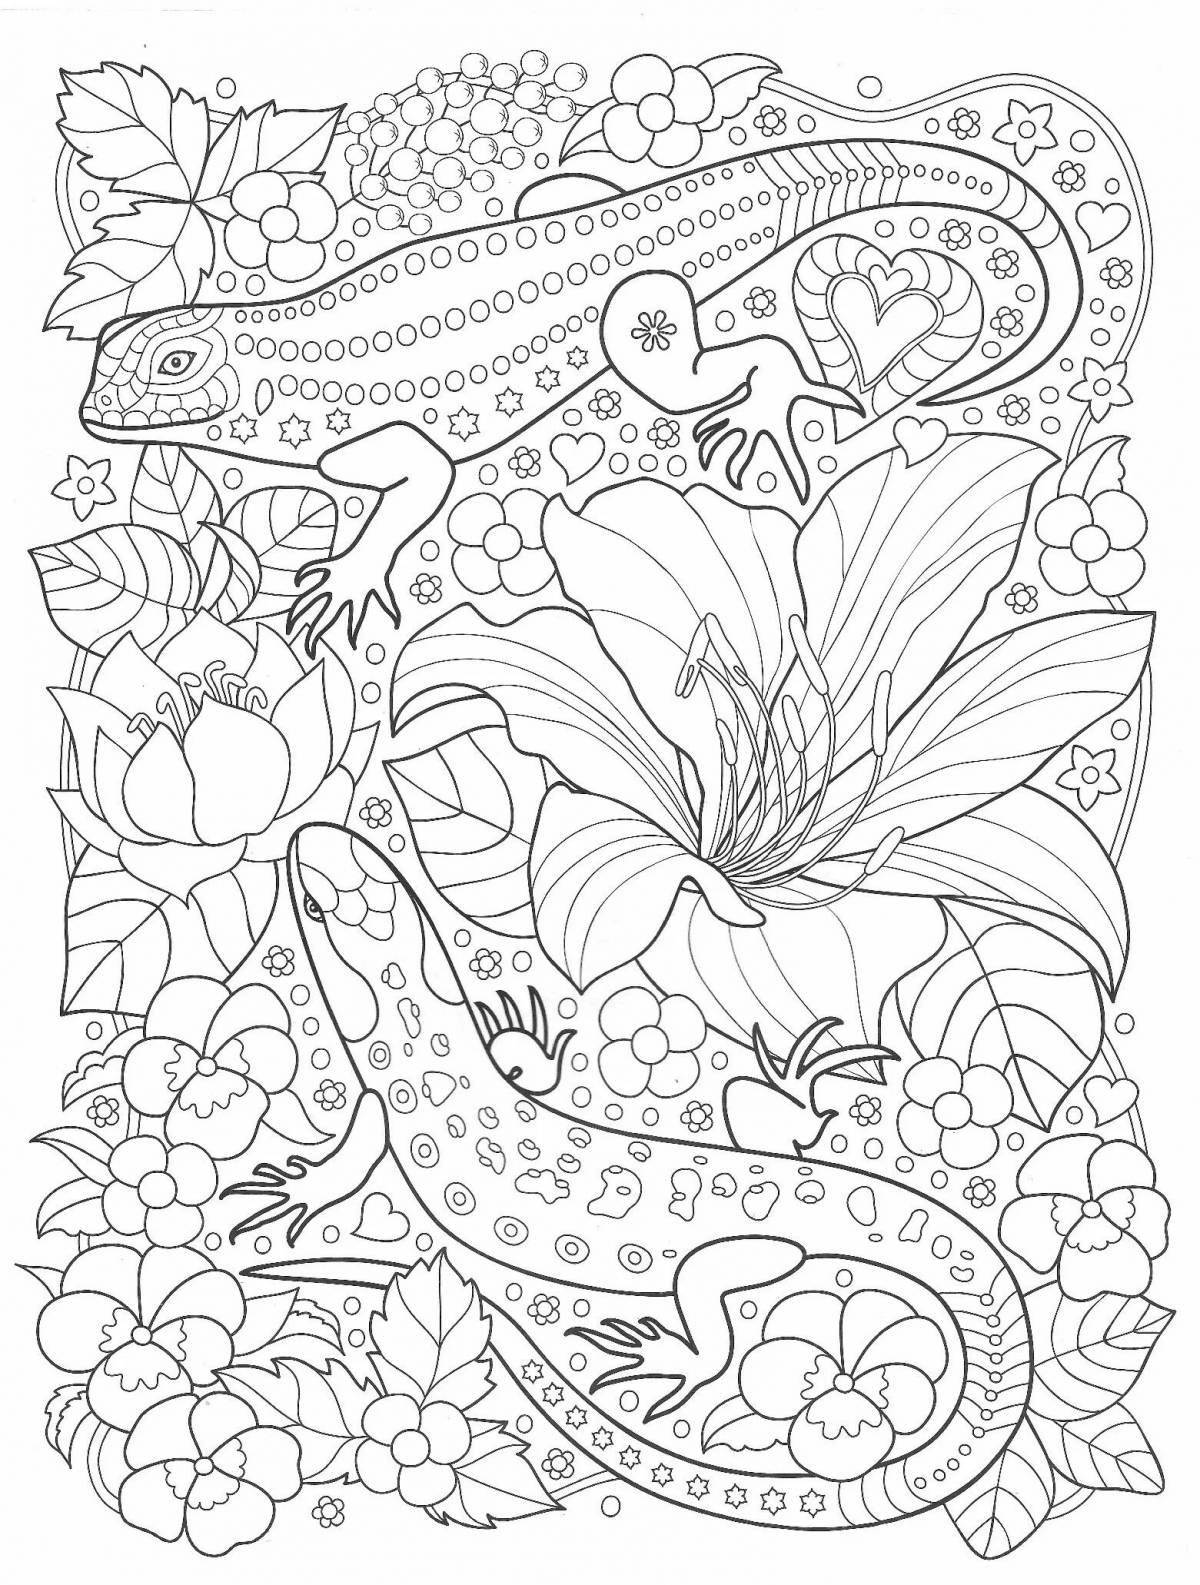 Radiant coloring page relax for kids